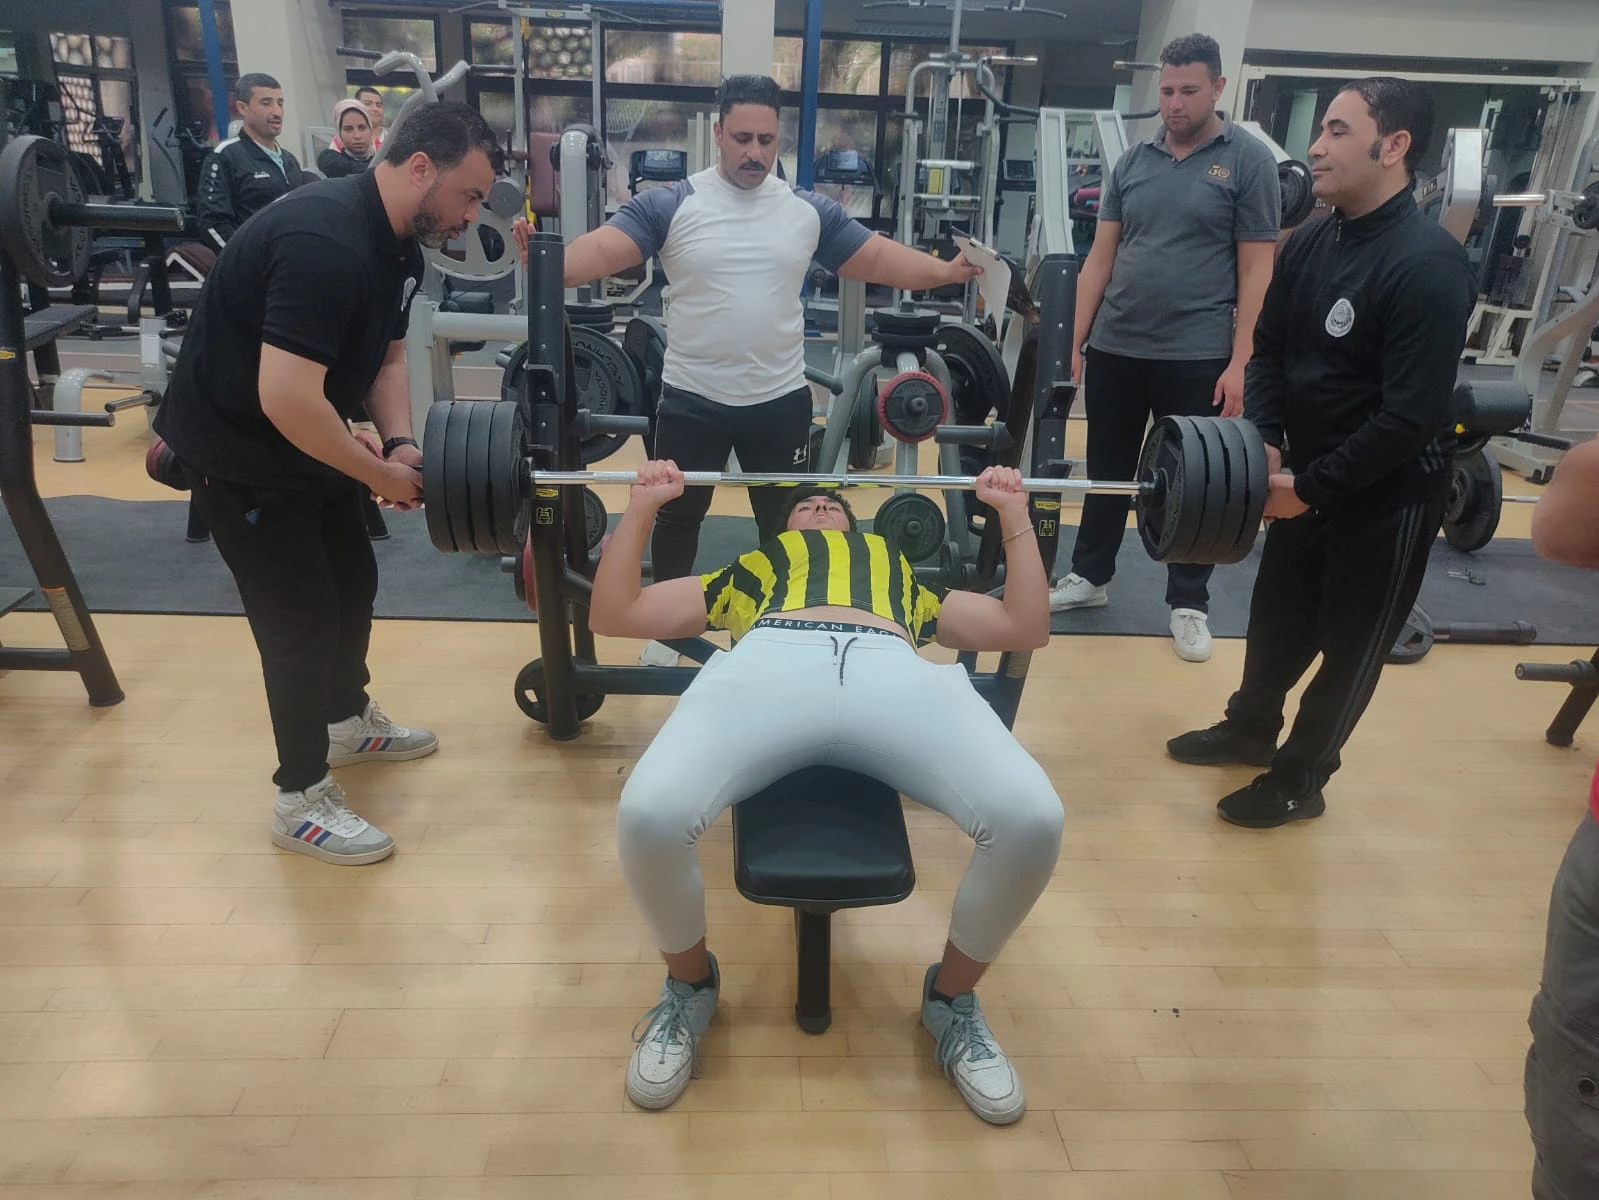 Power games championship (push bench / mind) with new gym